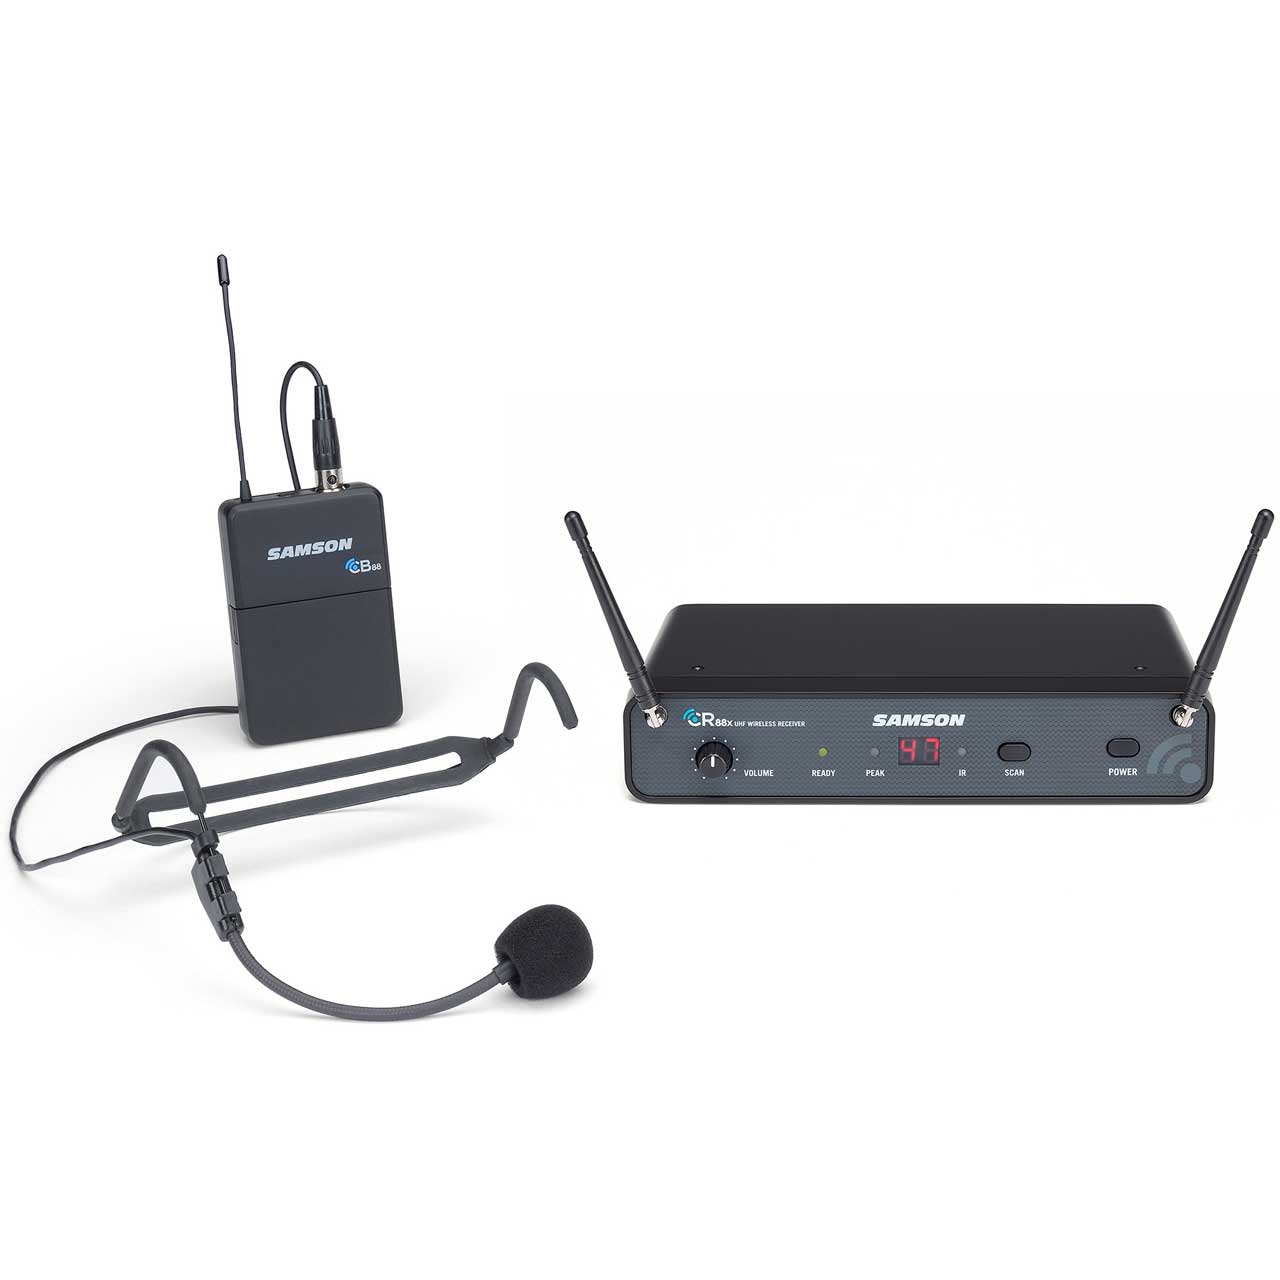 Samson SWC88XBHS5-D Concert 88x Wireless Headset System with HS5